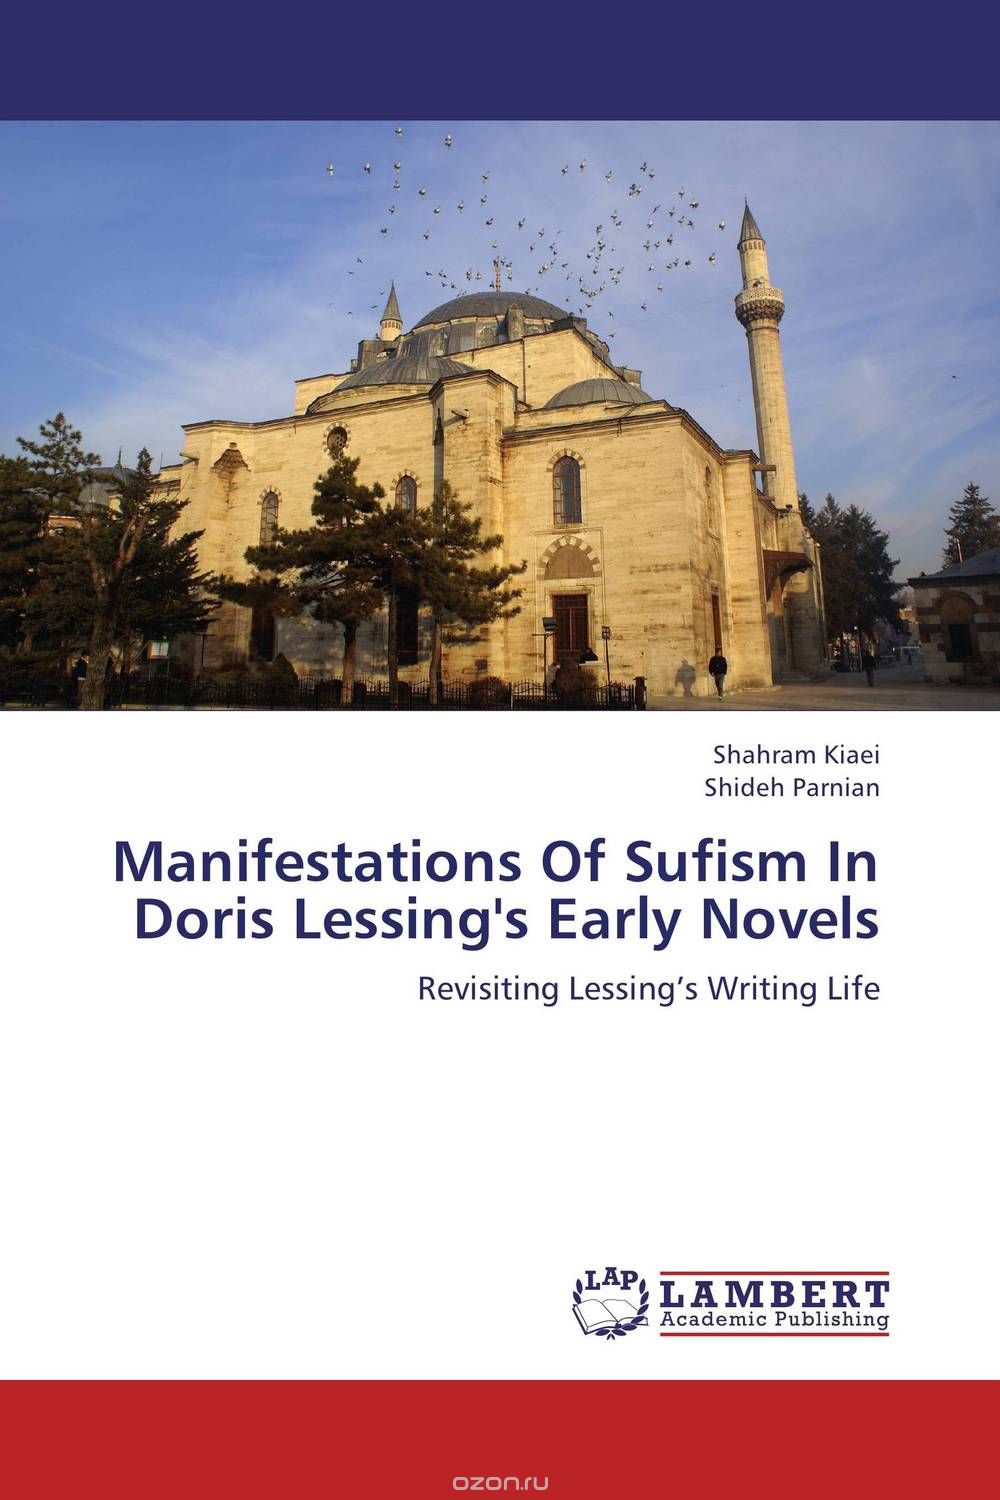 Manifestations Of Sufism In Doris Lessing's Early Novels